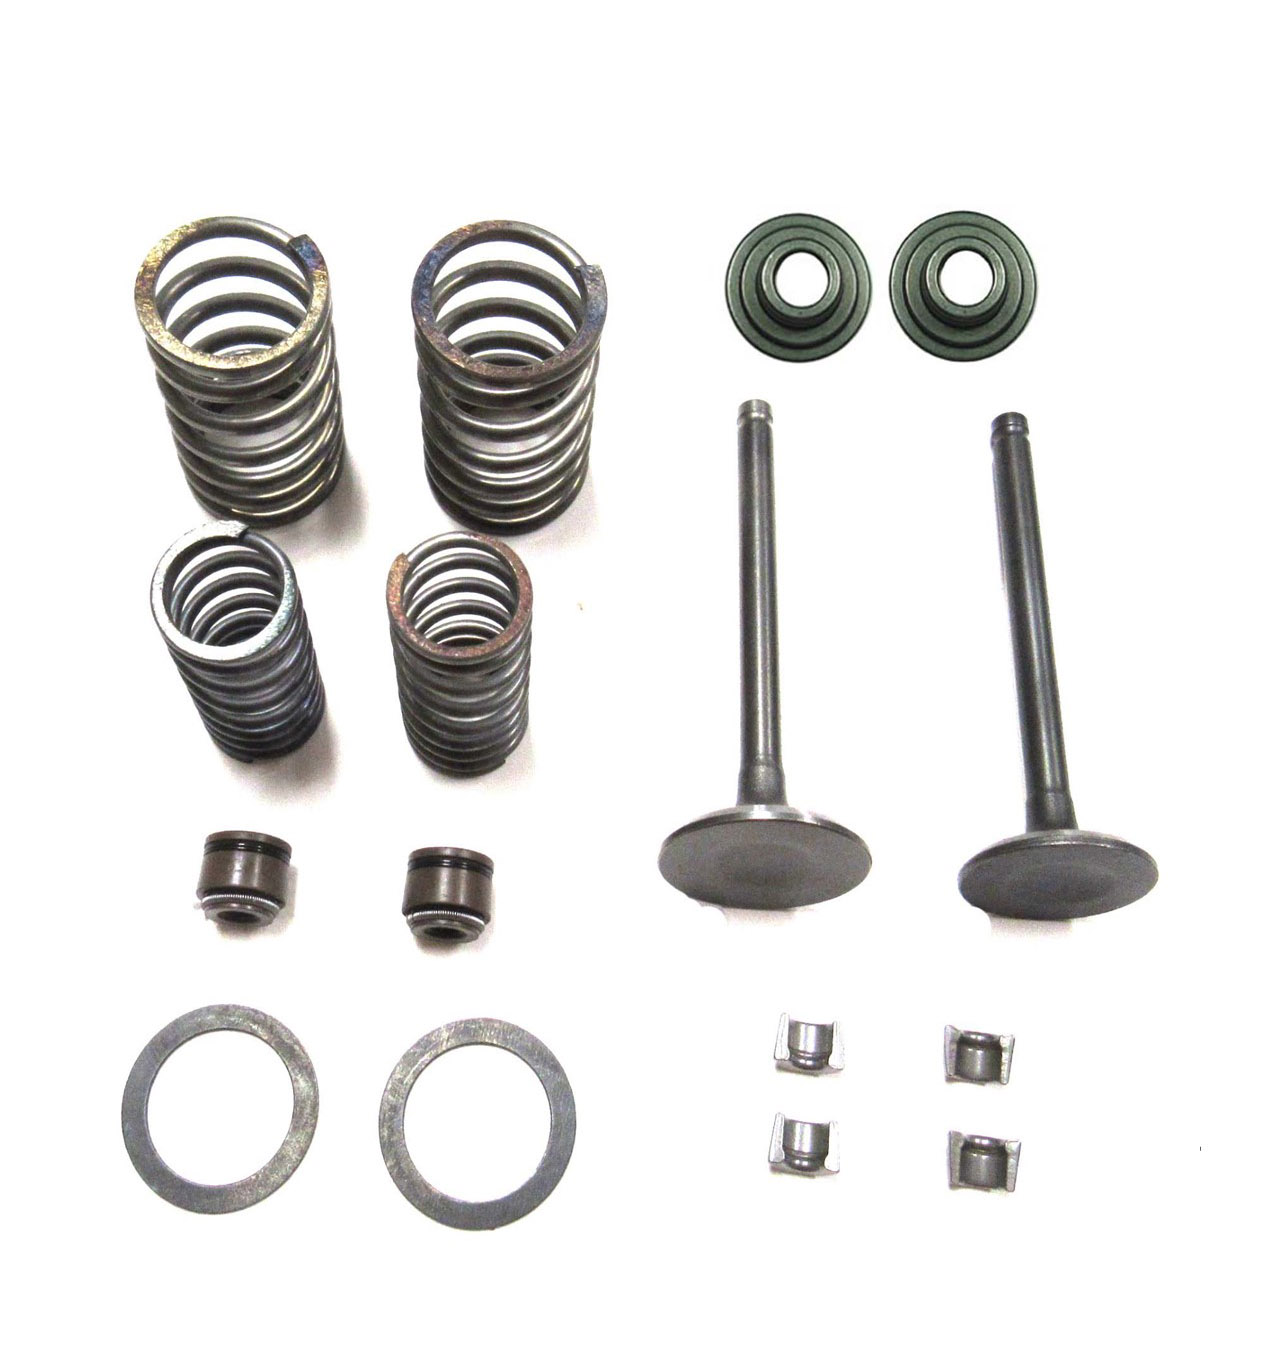 GY6-50 Valve Set 64mm Includes 2 Valves, 2 Springs, 2 Seals & retainer clips